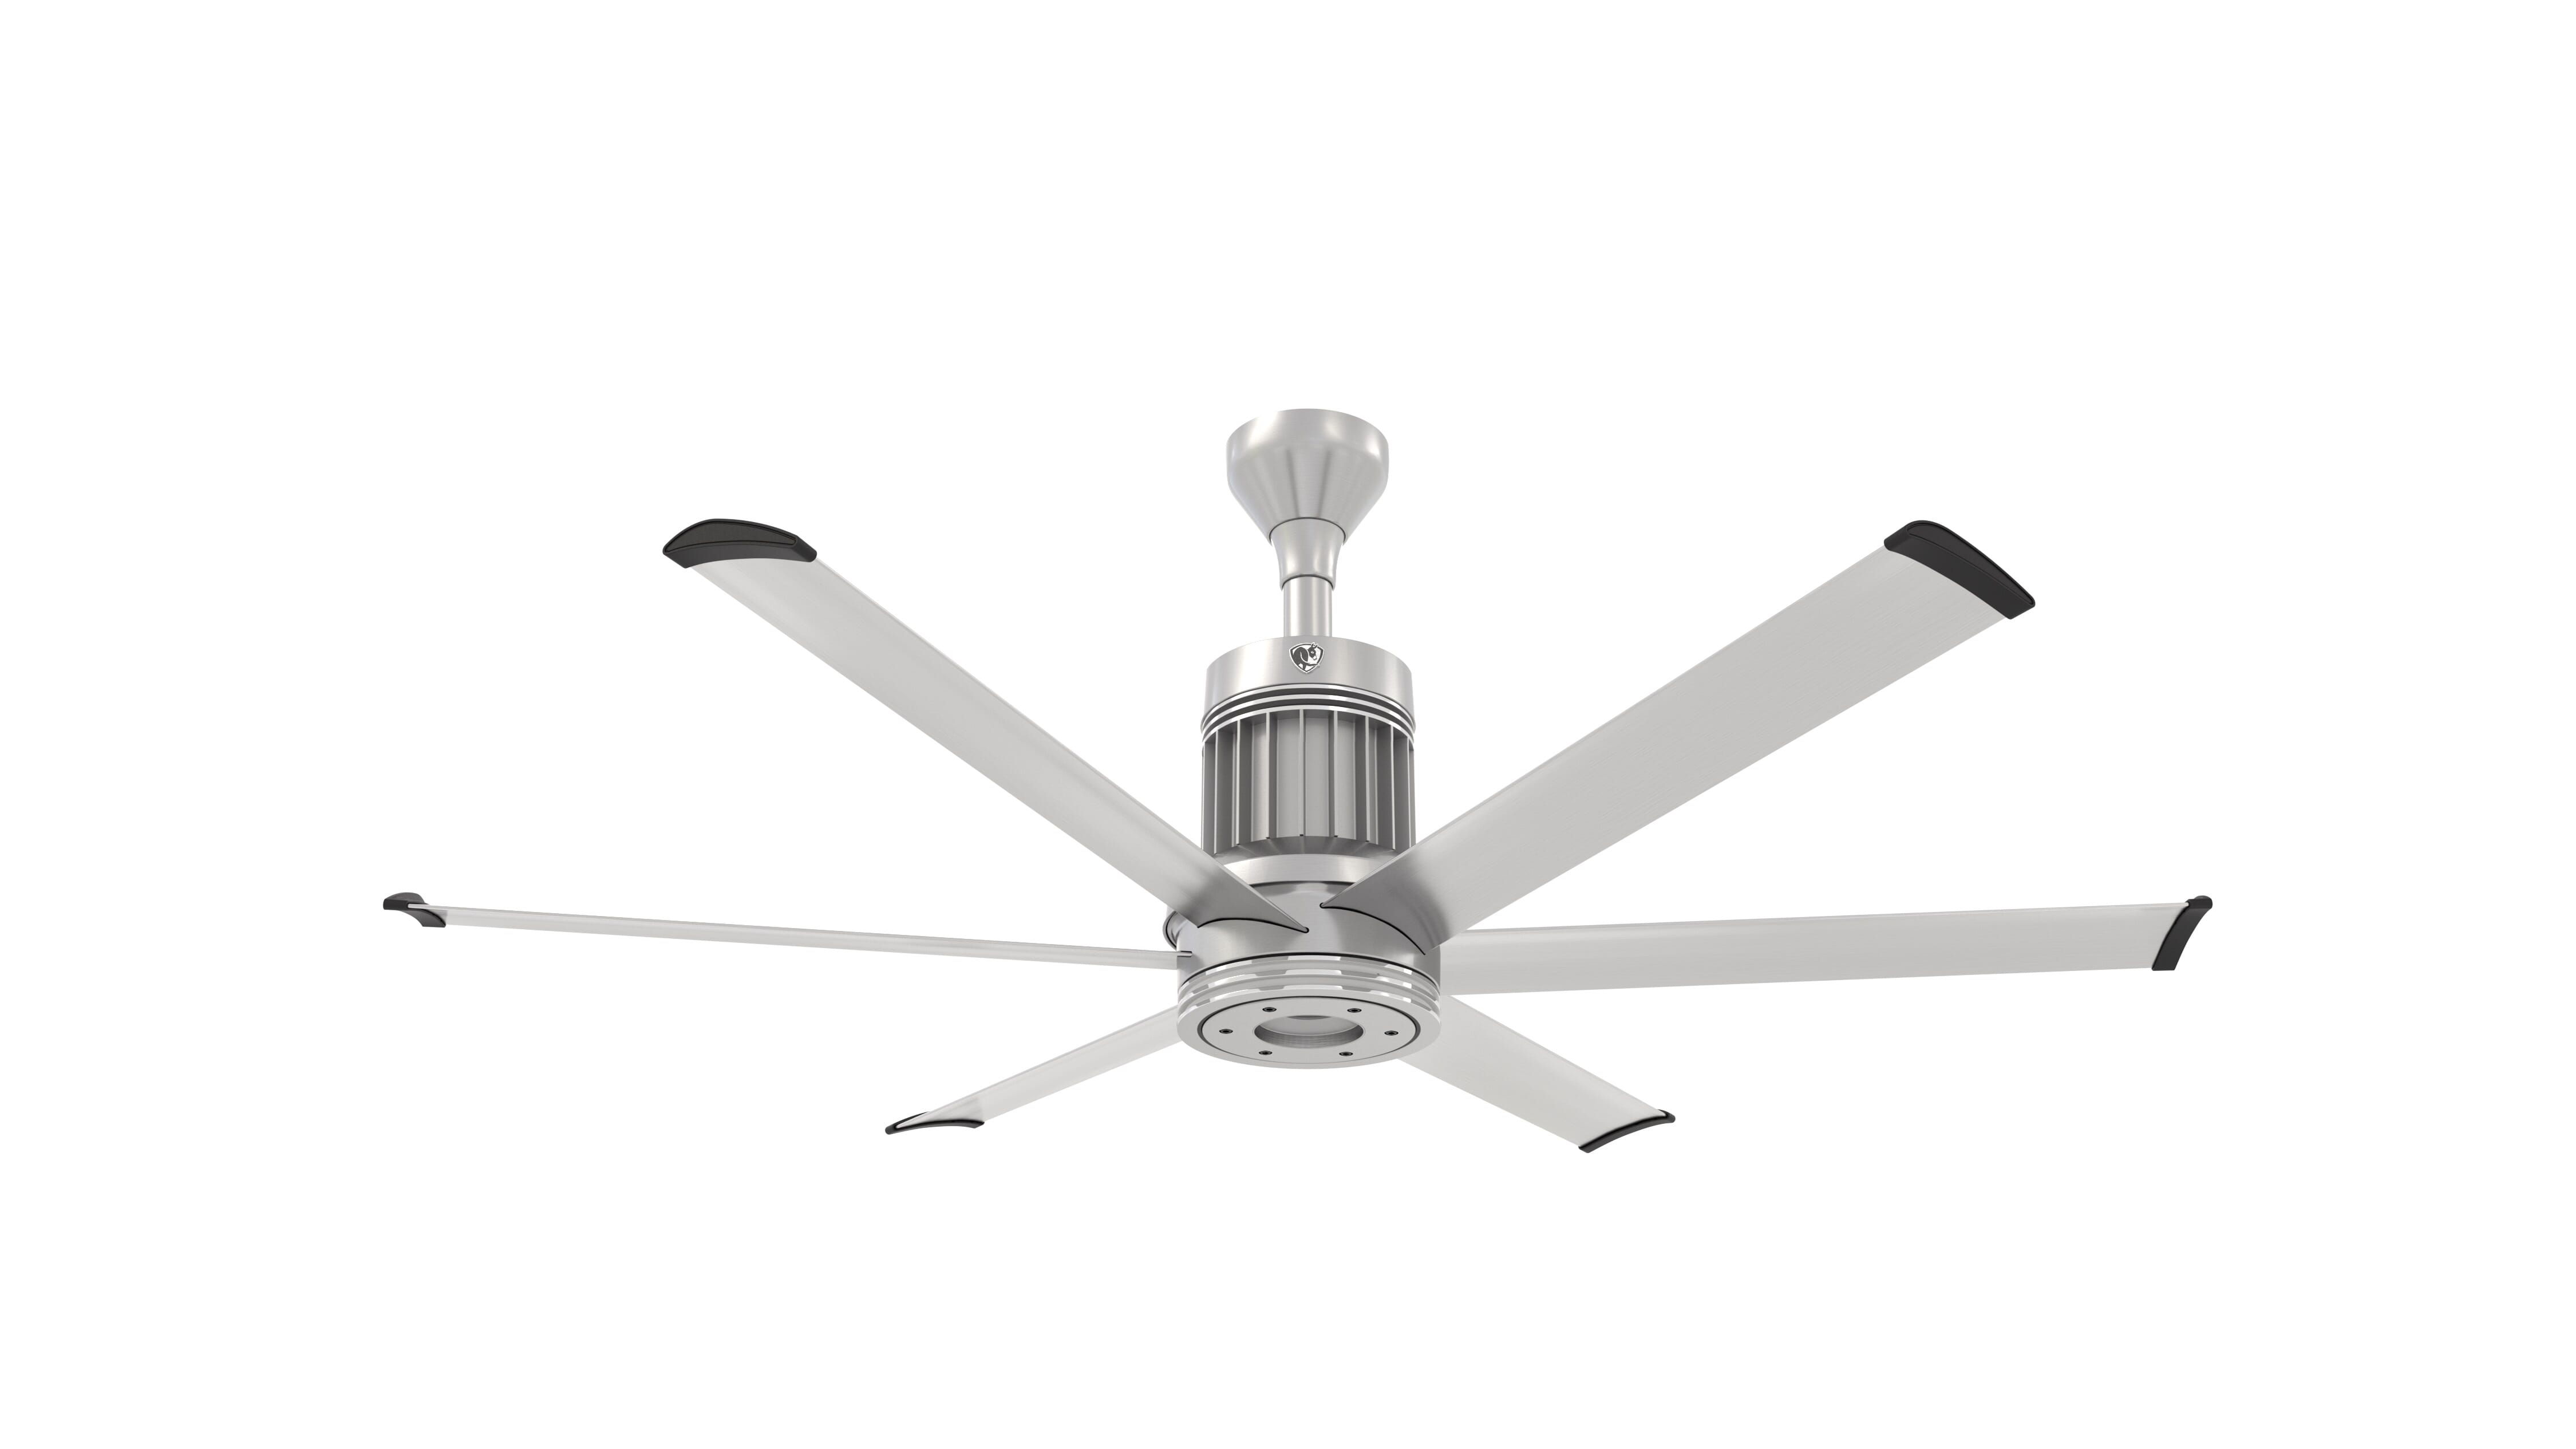 60 Outdoor Ceiling Fan       / Swell 60 Dc Motor Indoor Outdoor Ceiling Fan With Walnut Blades By Hinkley / After the list, we've completed succinct but informative reviews for each model.